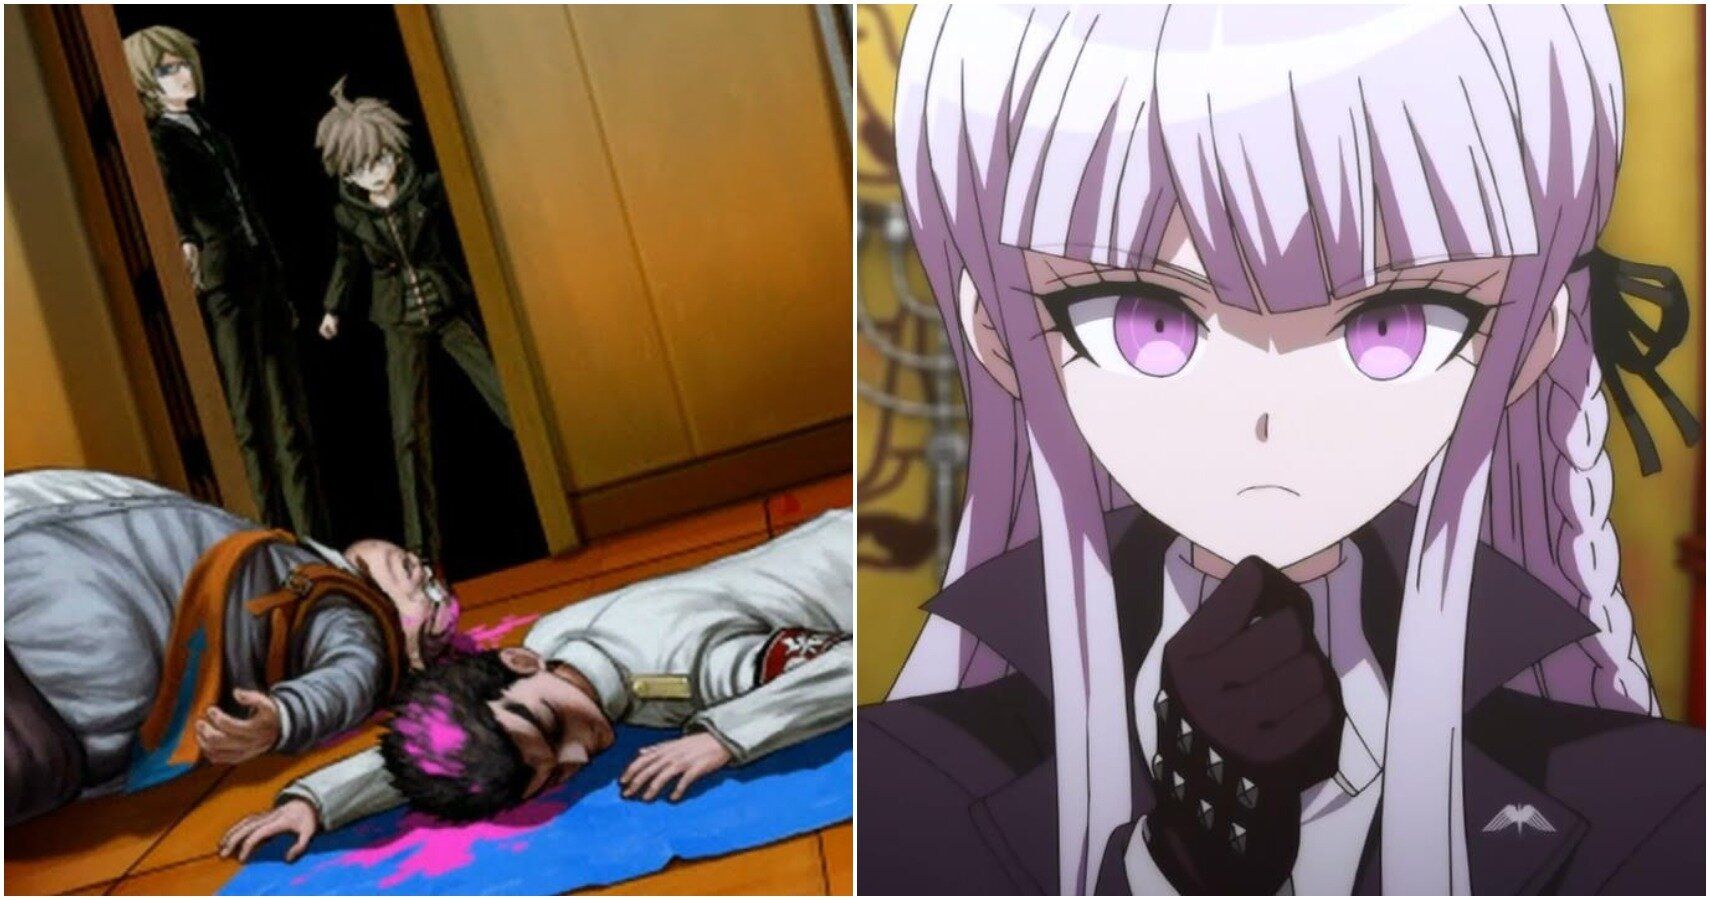 Danganronpa: 10 Differences Between The Anime & The Video Game